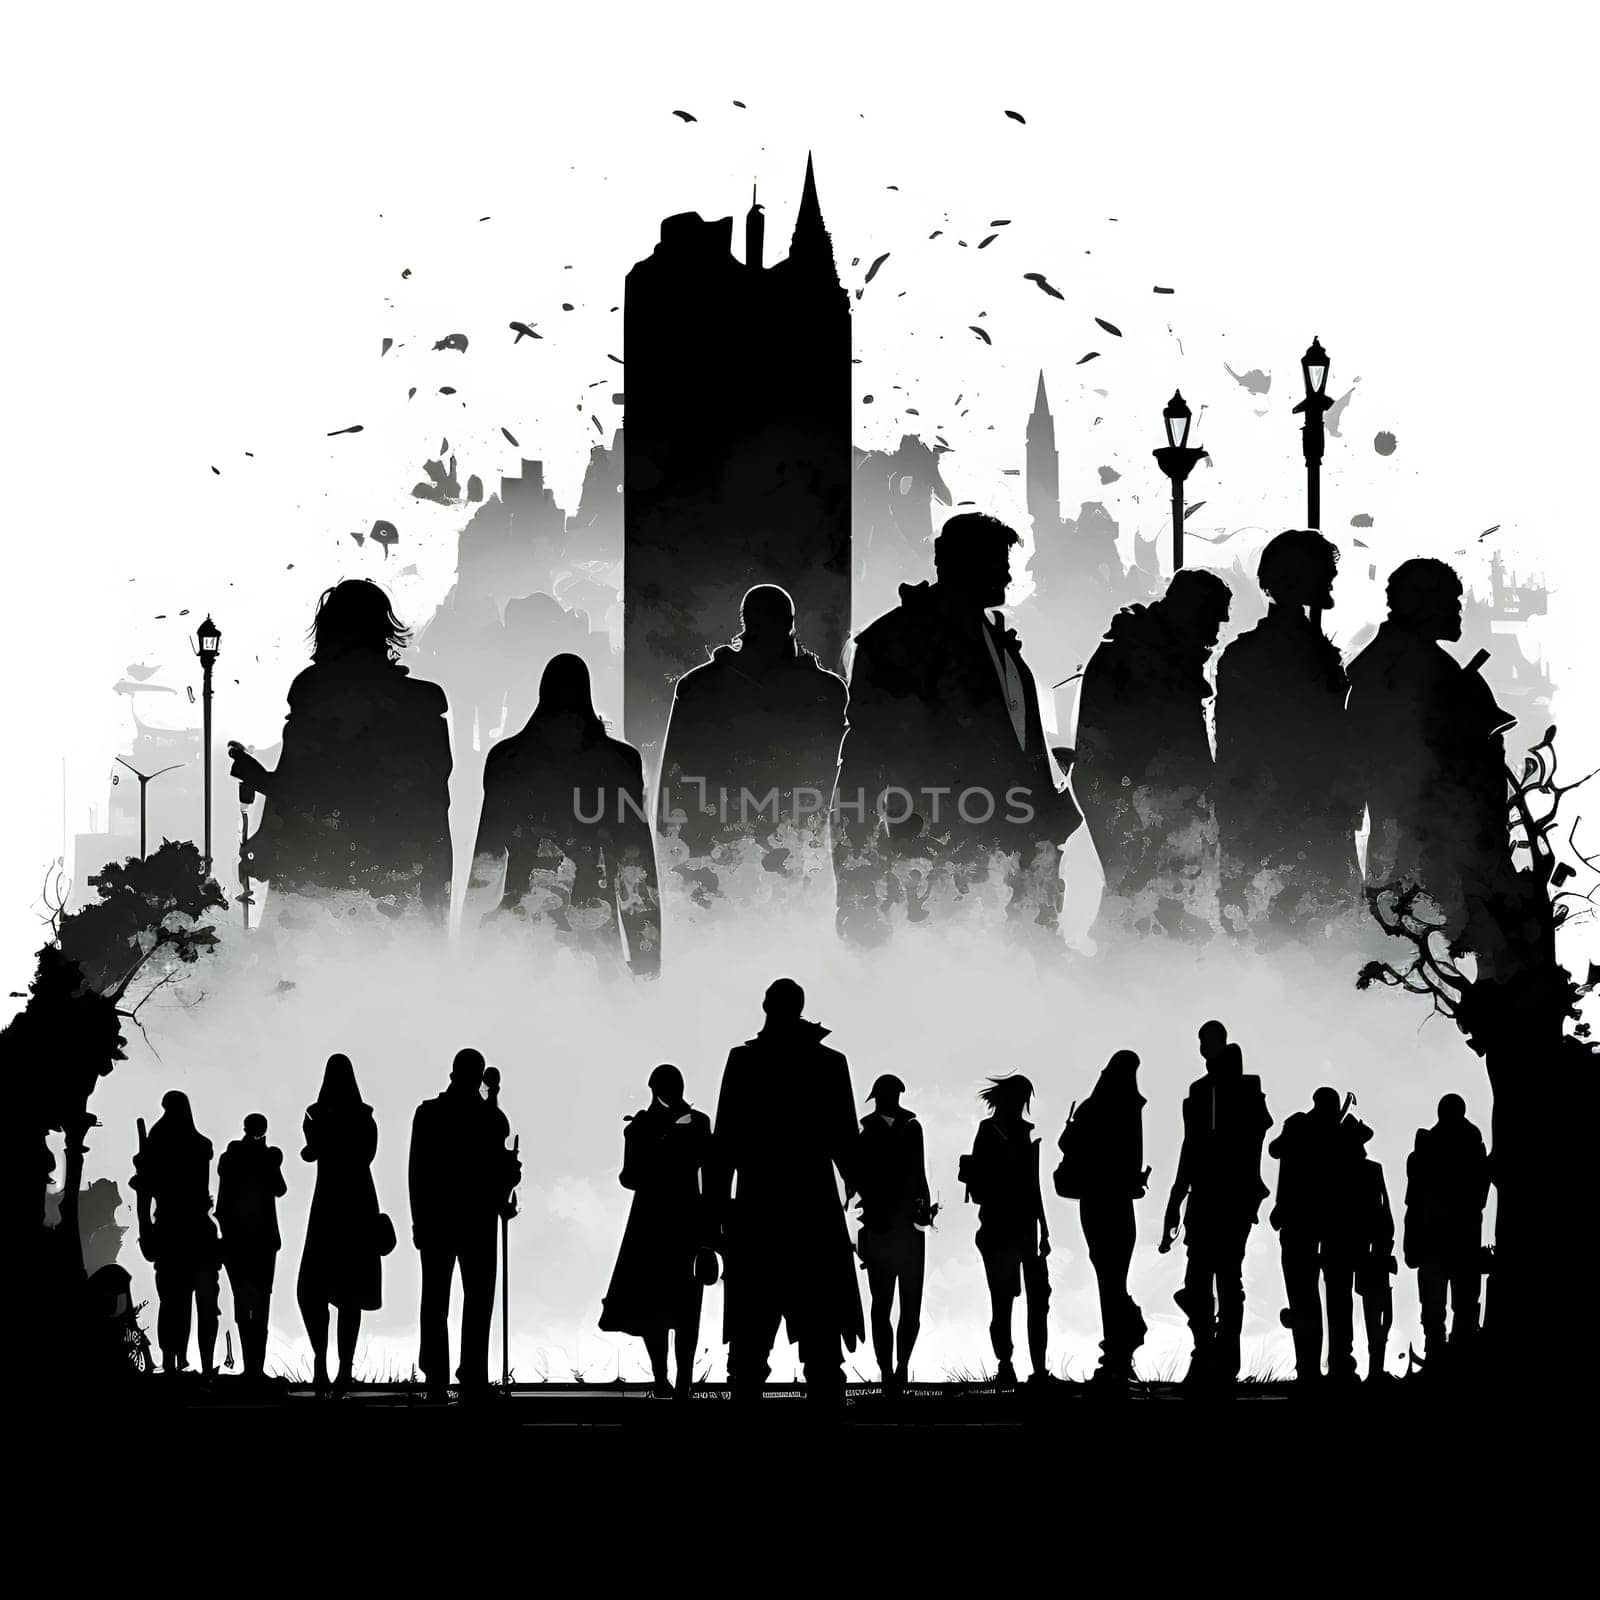 Vector illustration of group of people in the city in black silhouette against a clean white background, capturing graceful forms.